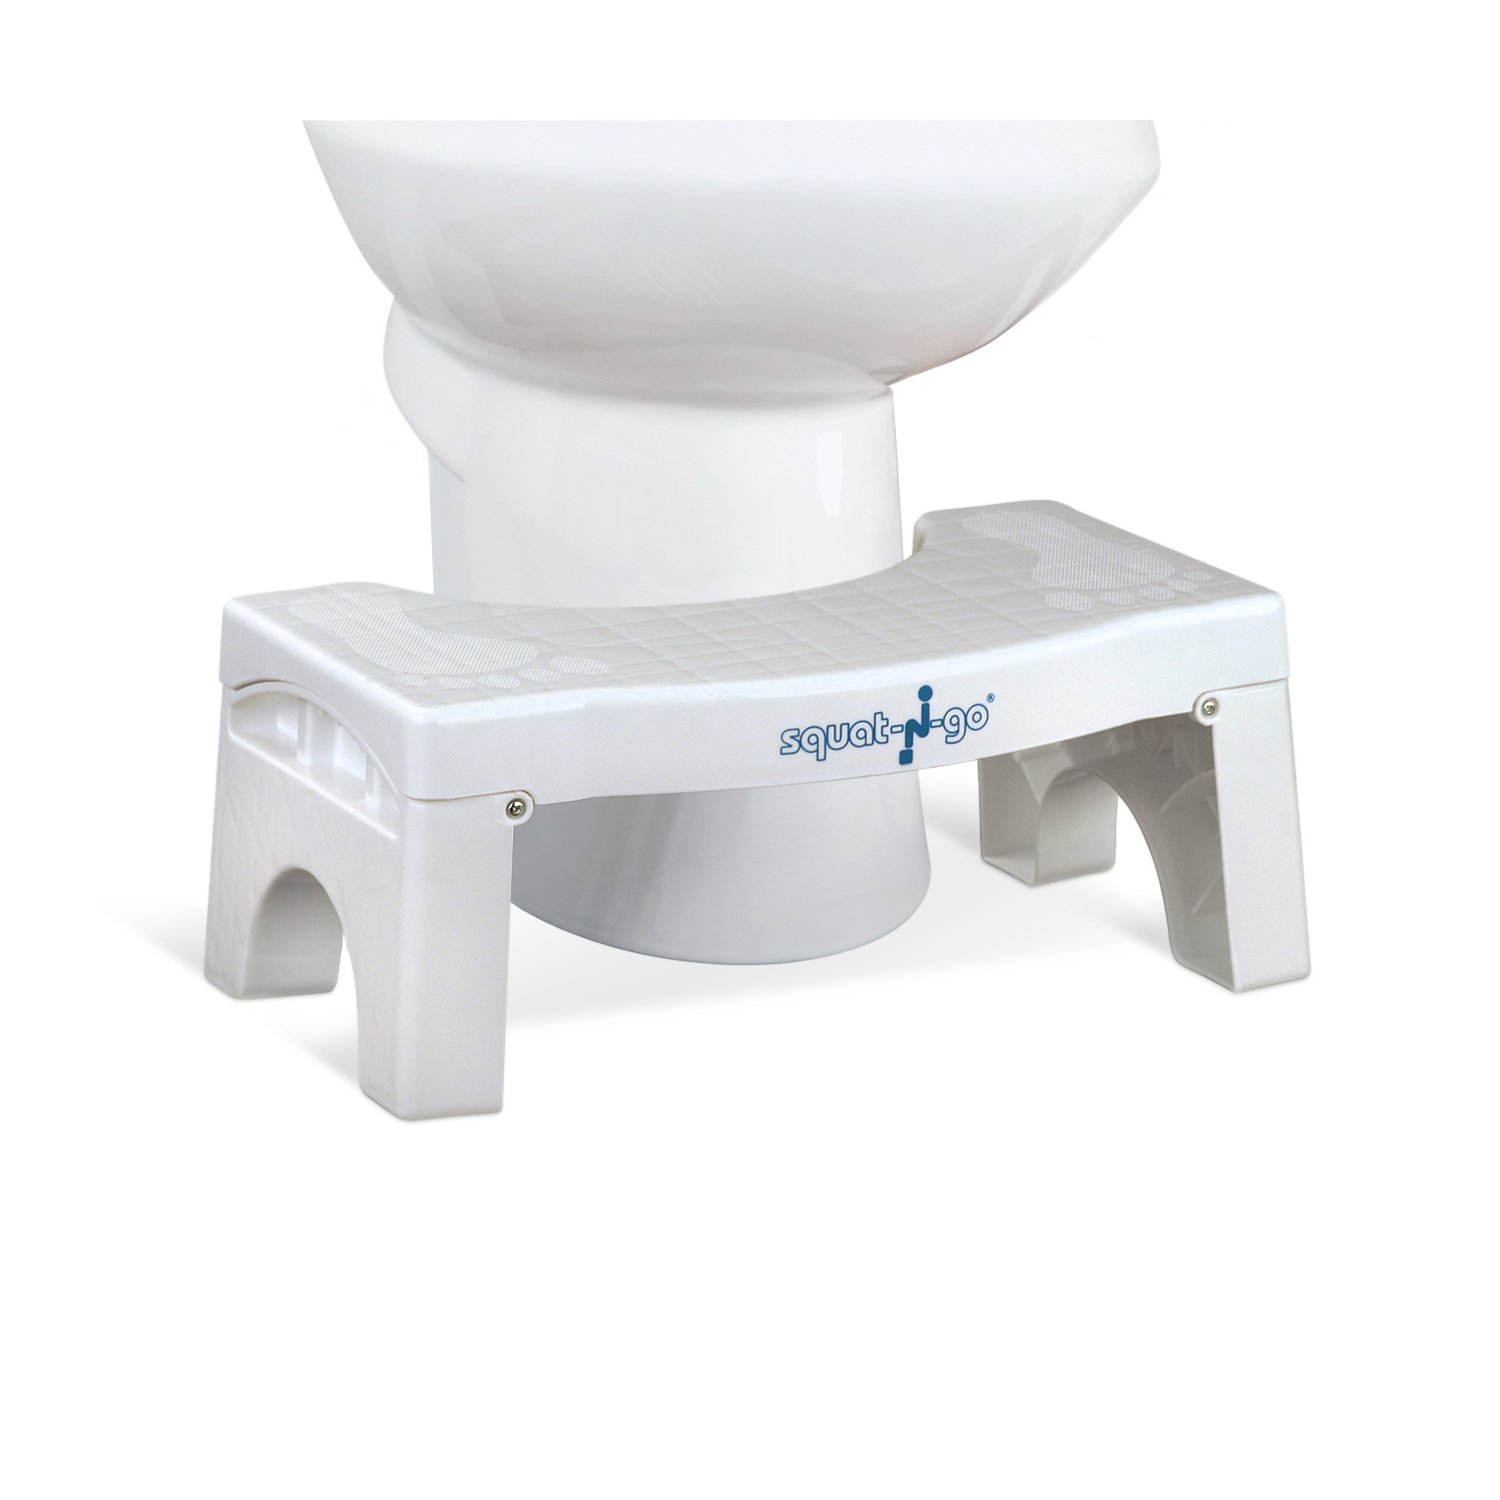 Book Cover Squat N Go Folding Squatting Stool | The Only Foldable Toilet Stool | Convenient and Compact Great for Travel | Fits All Toilets, Folds for Easy Storage, Use in Any Bathroom | White Color |